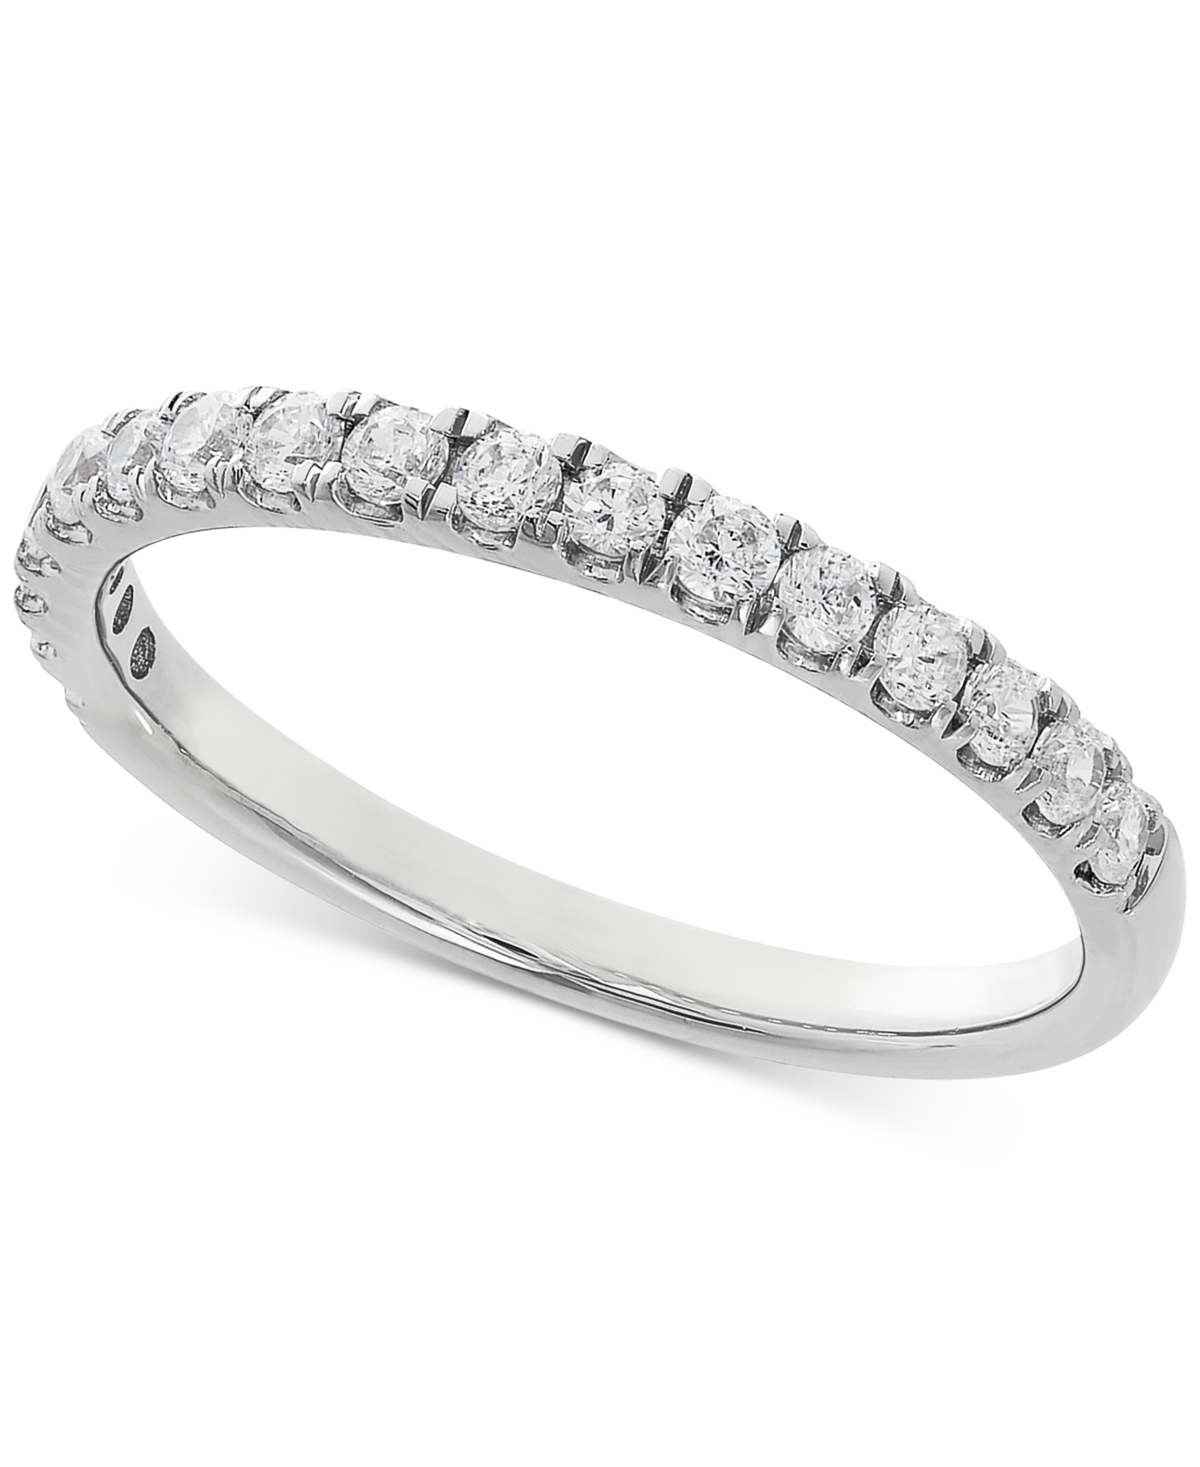 Igi Certified Lab Grown Diamond Band (3/8 ct. t.w.) in 14k White or Yellow Gold - Yellow Gold